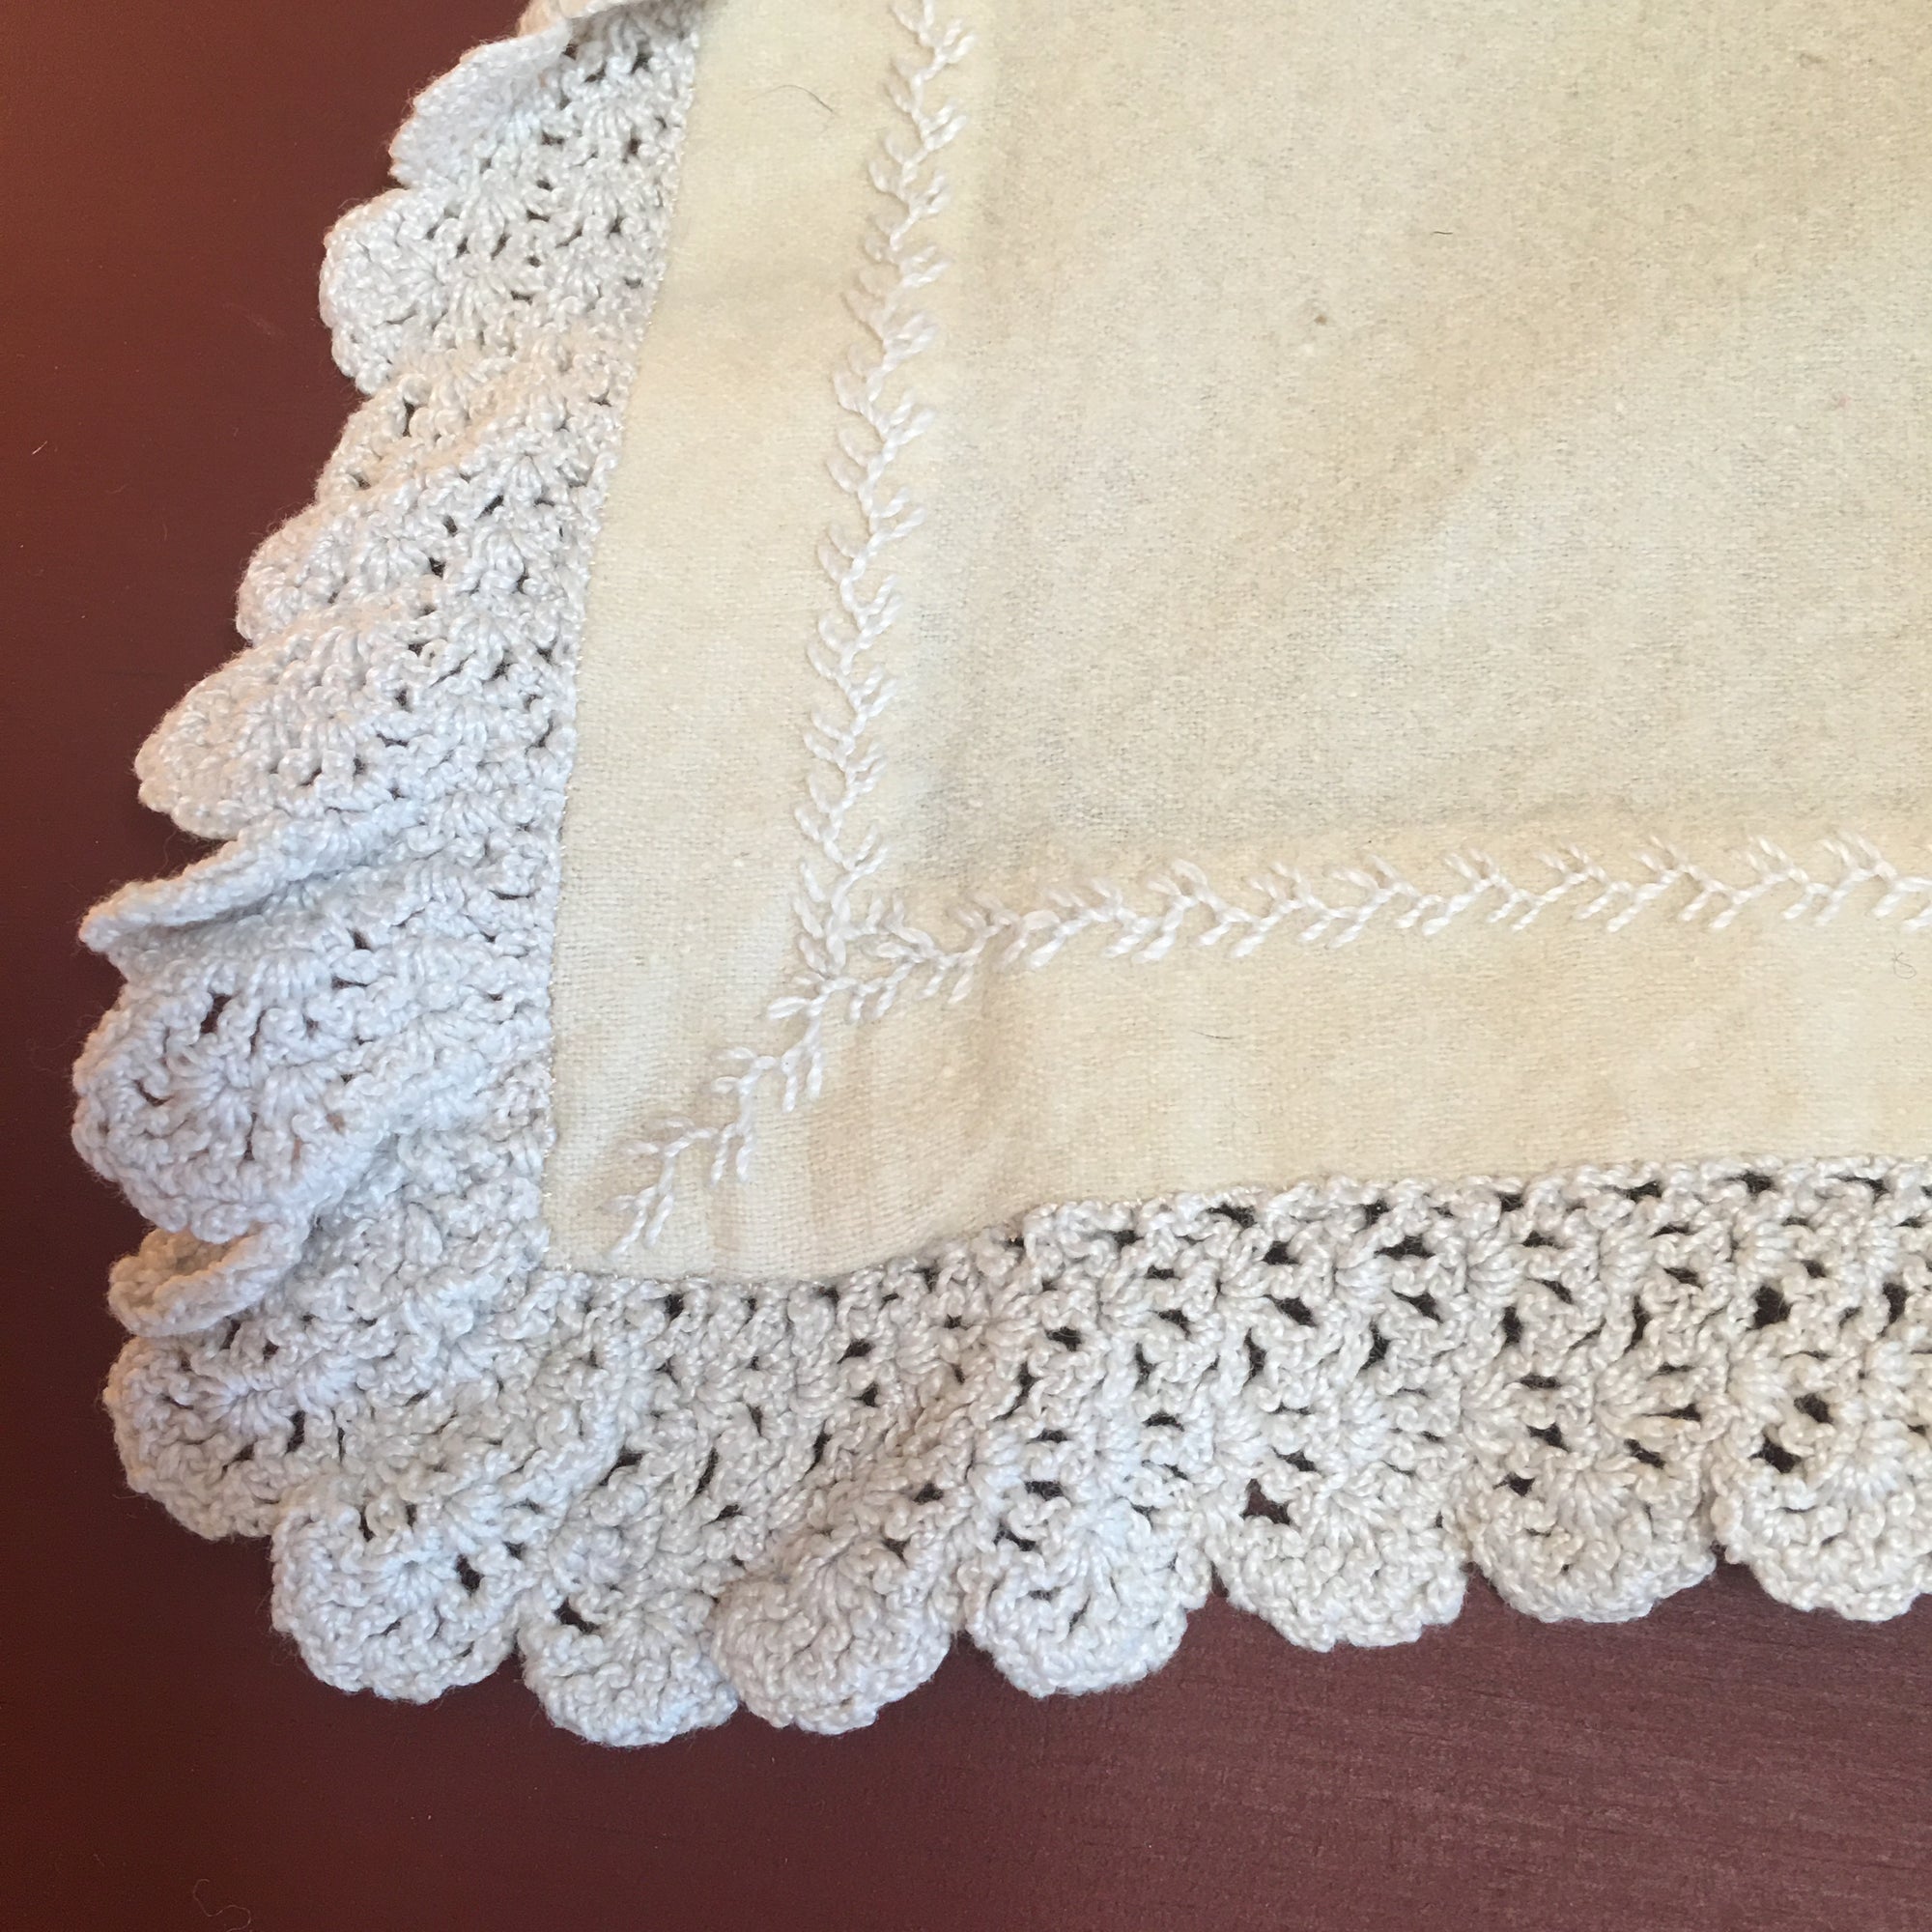 Homespun Wool Baby Blanket, Crocheted Lace Trim, Hand Embroidered